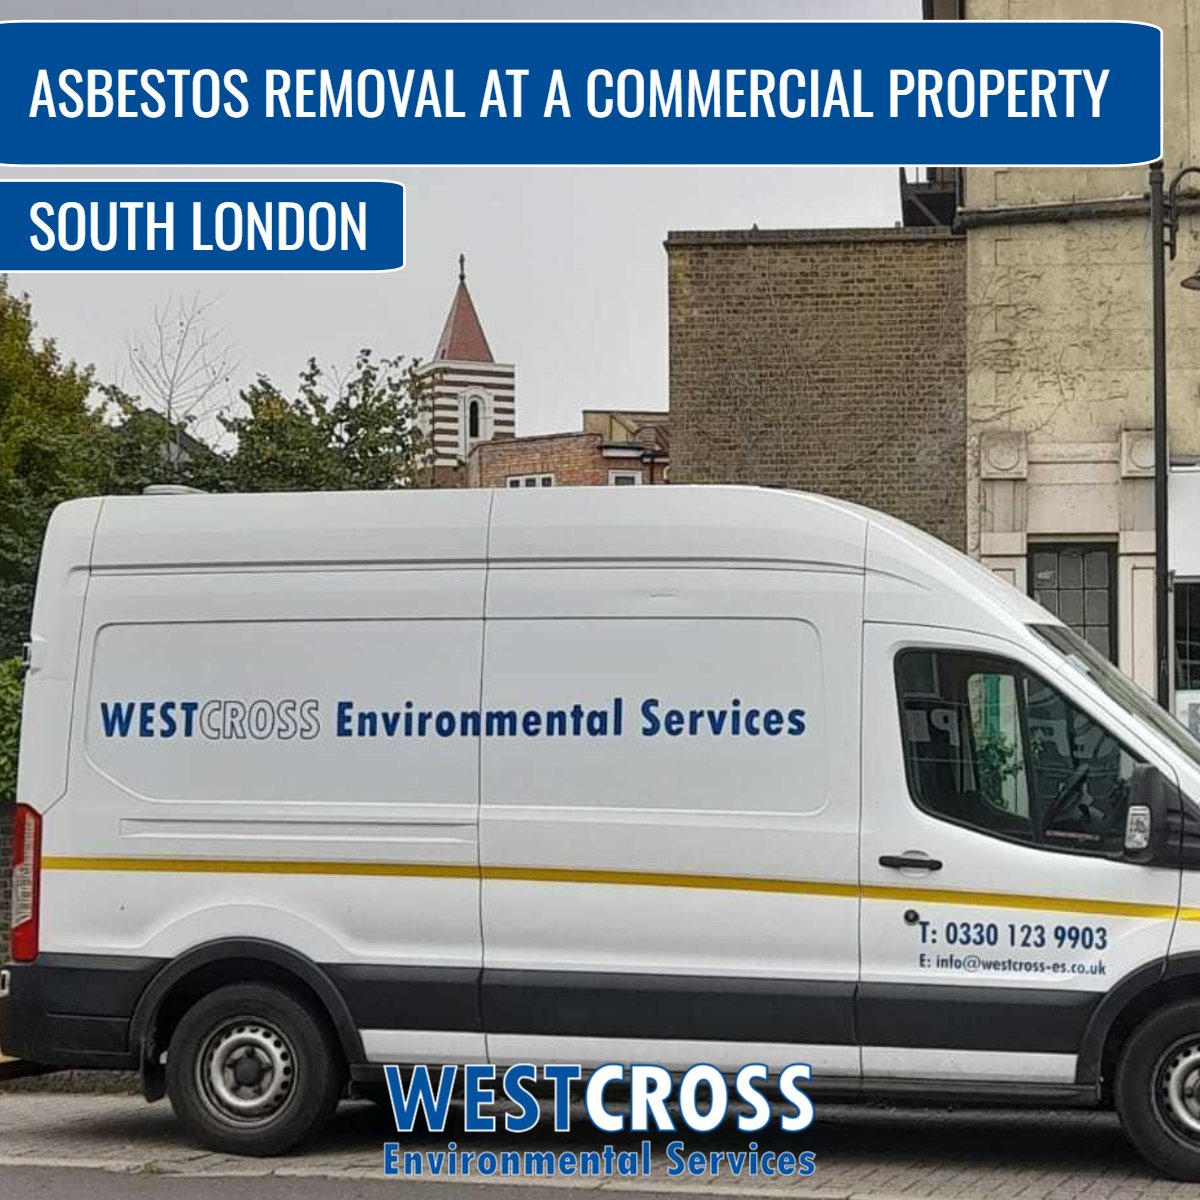 Discovery of additional asbestos whilst on a project in South London